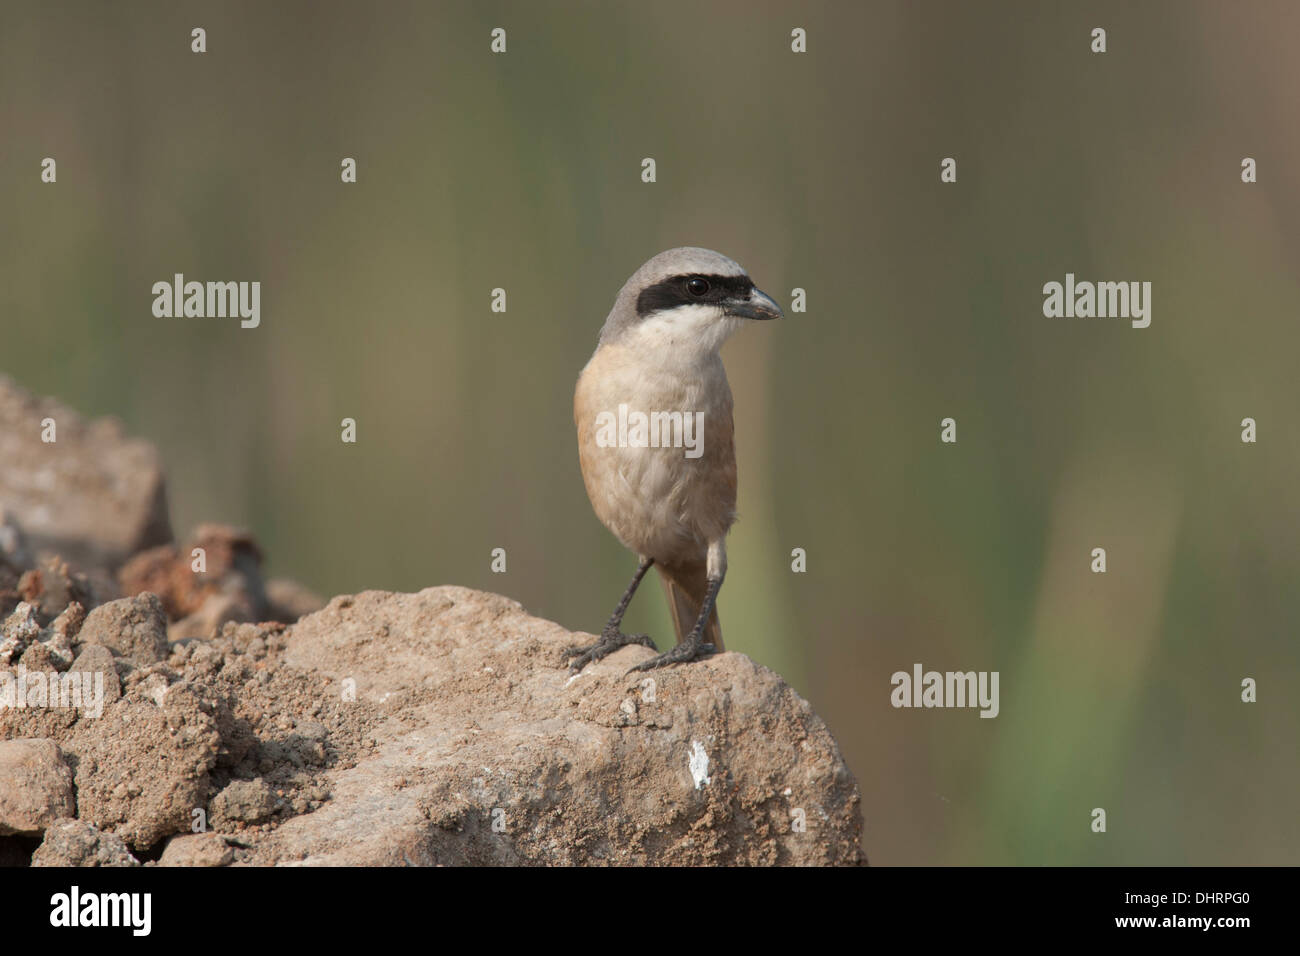 The Long-tailed Shrike or Rufous-backed Shrike (Lanius schach)  on a rock at Uran , a habitat which is both marshy and grassland Stock Photo